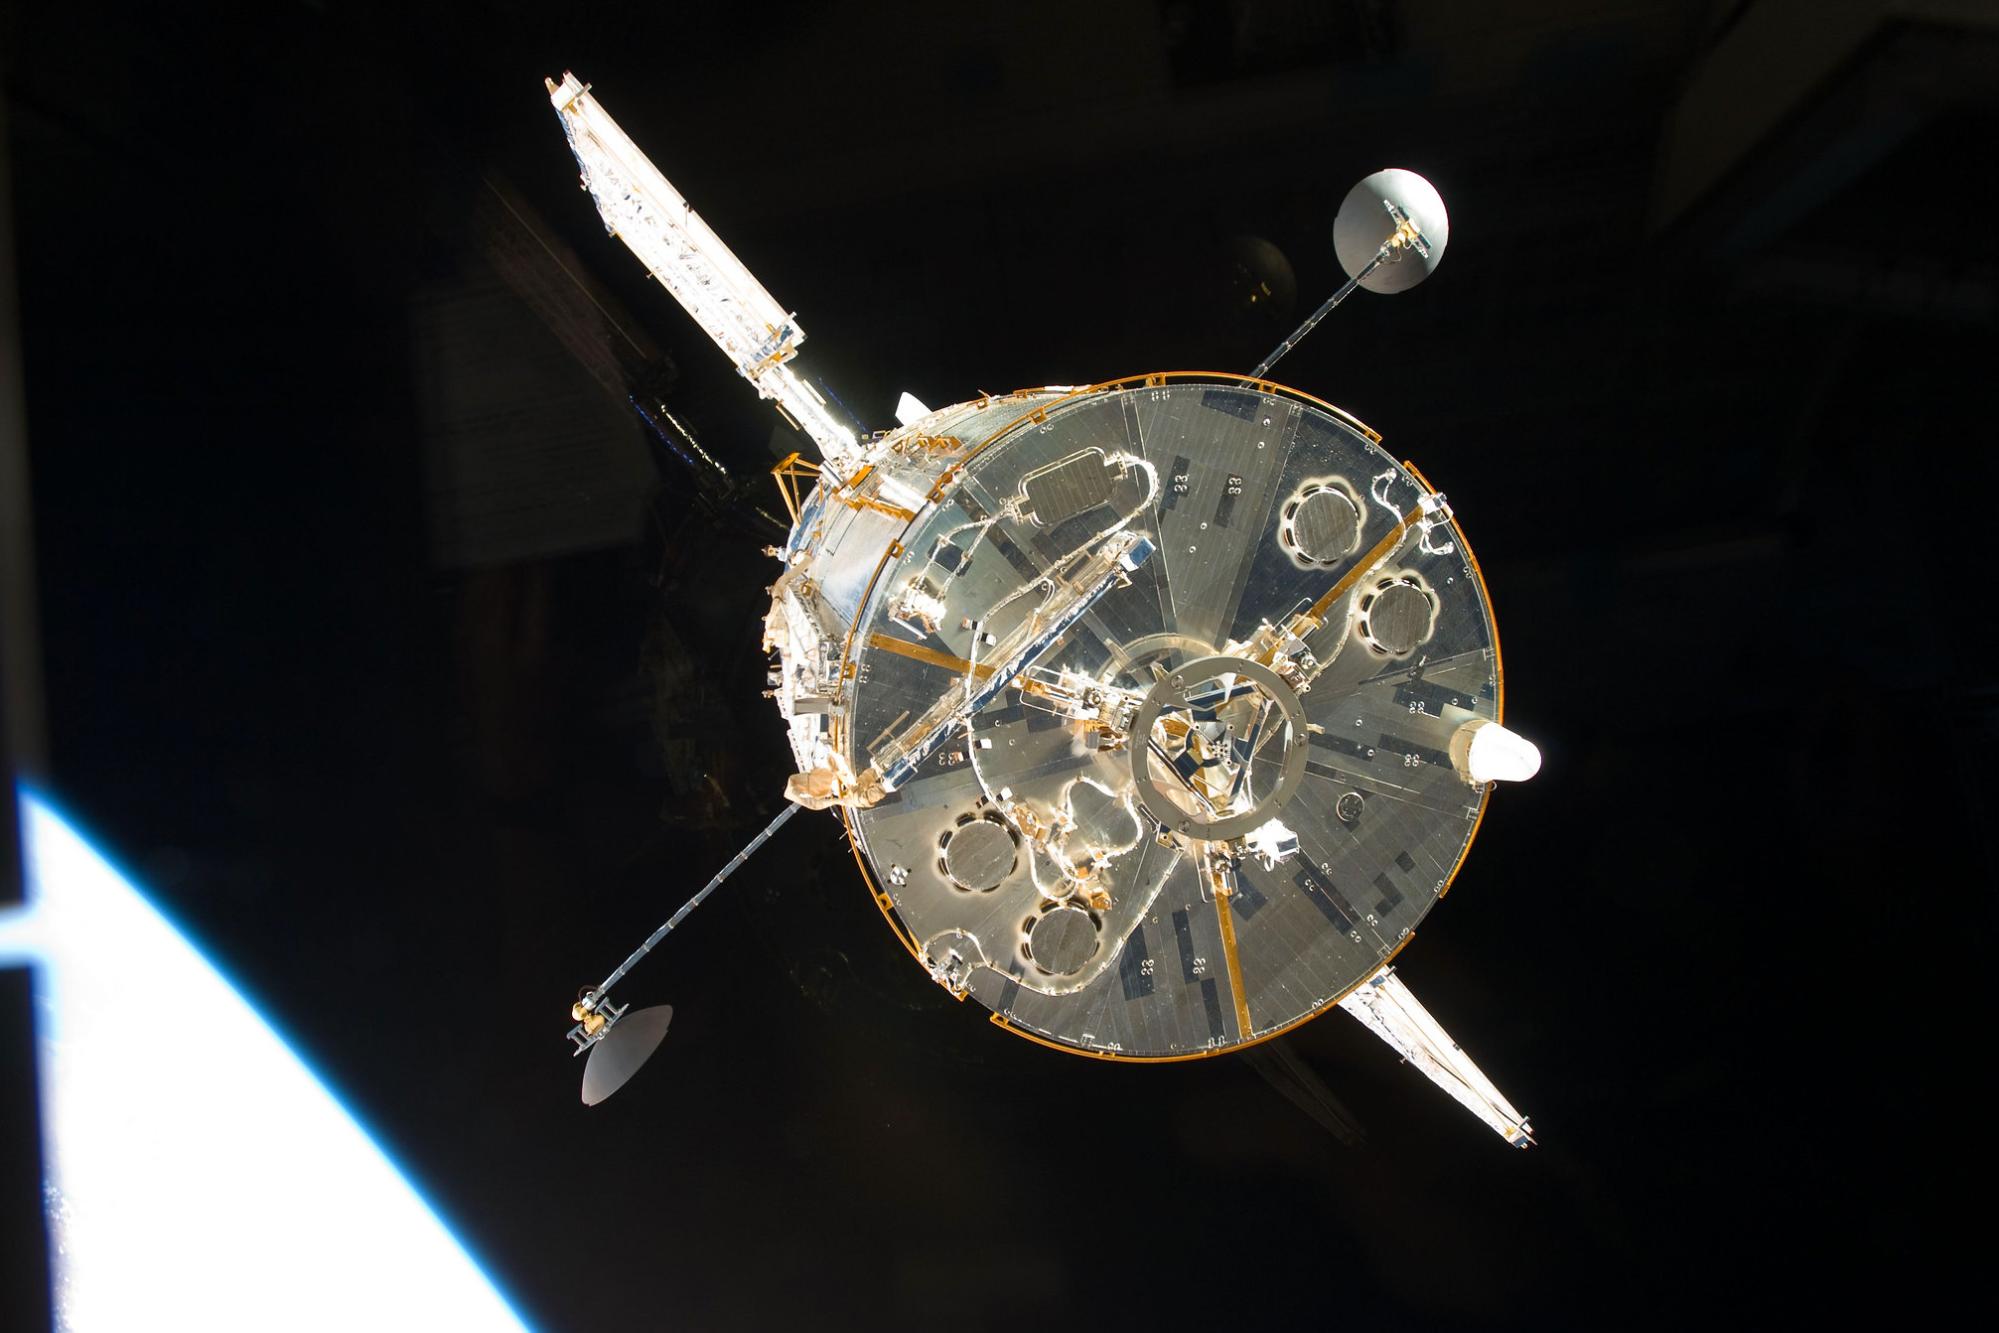 Hubble Space Telescope Fixed After Month of No Science